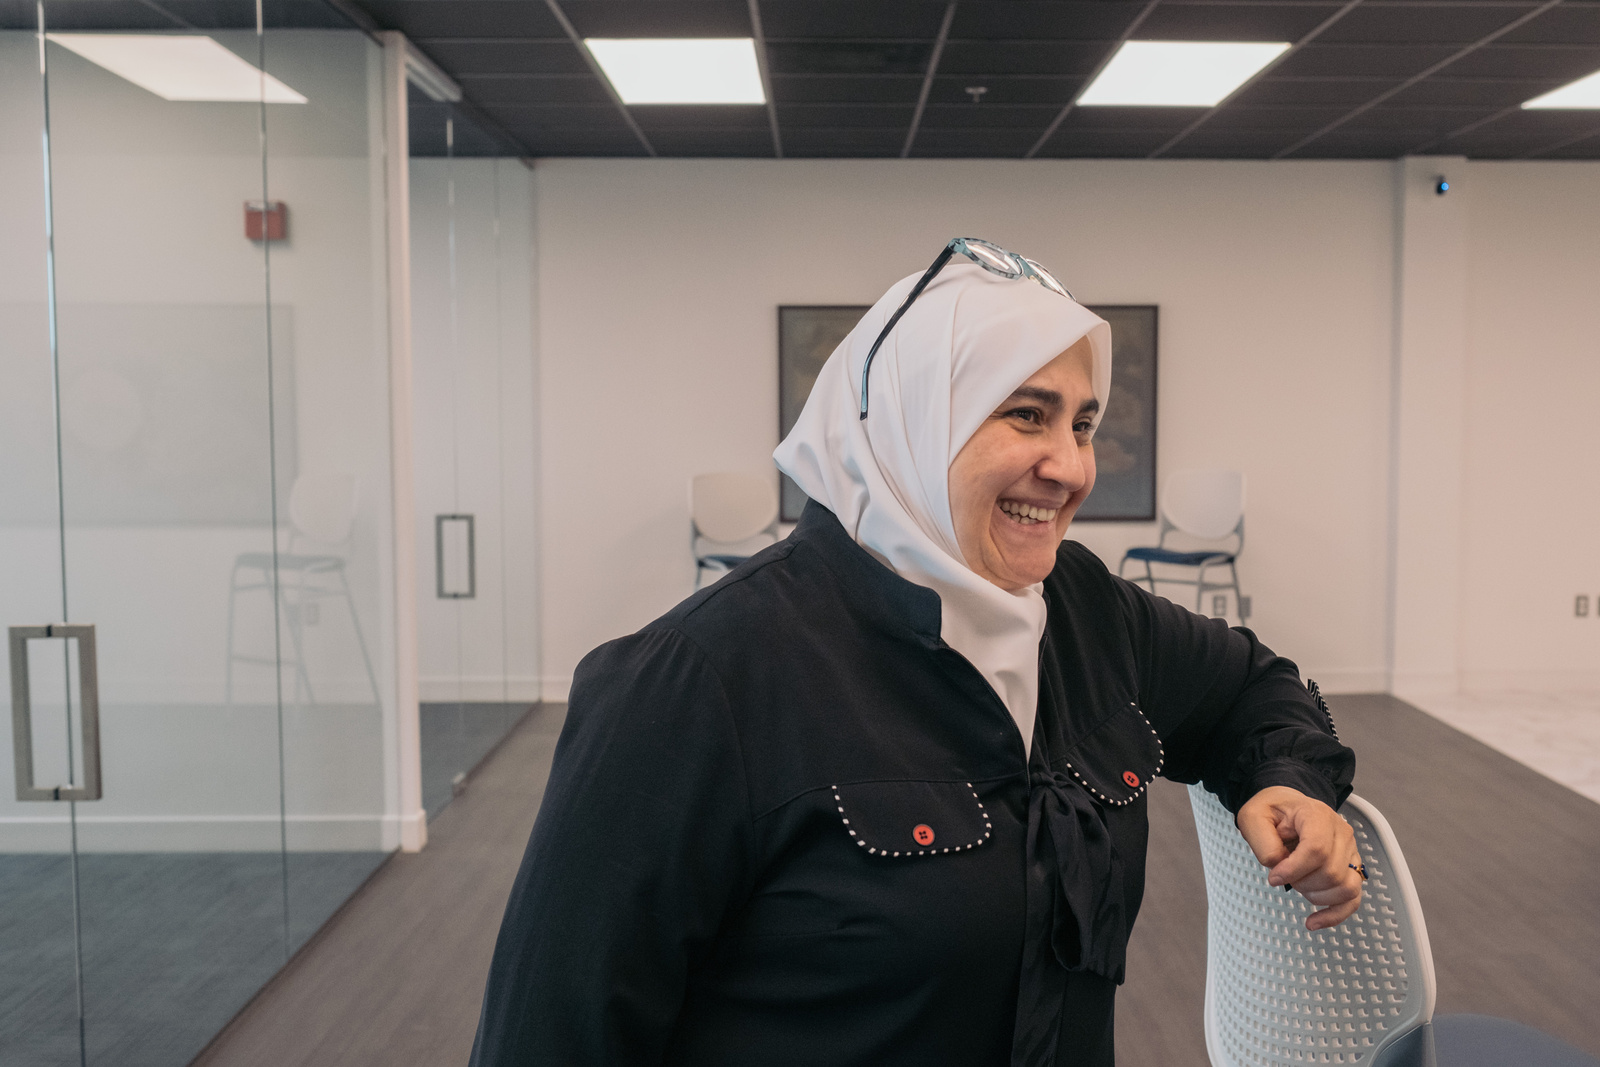 The founder and CEO of Mozaic, Raghad Bushnaq. © UNHCR/Jeoffrey Guillemard